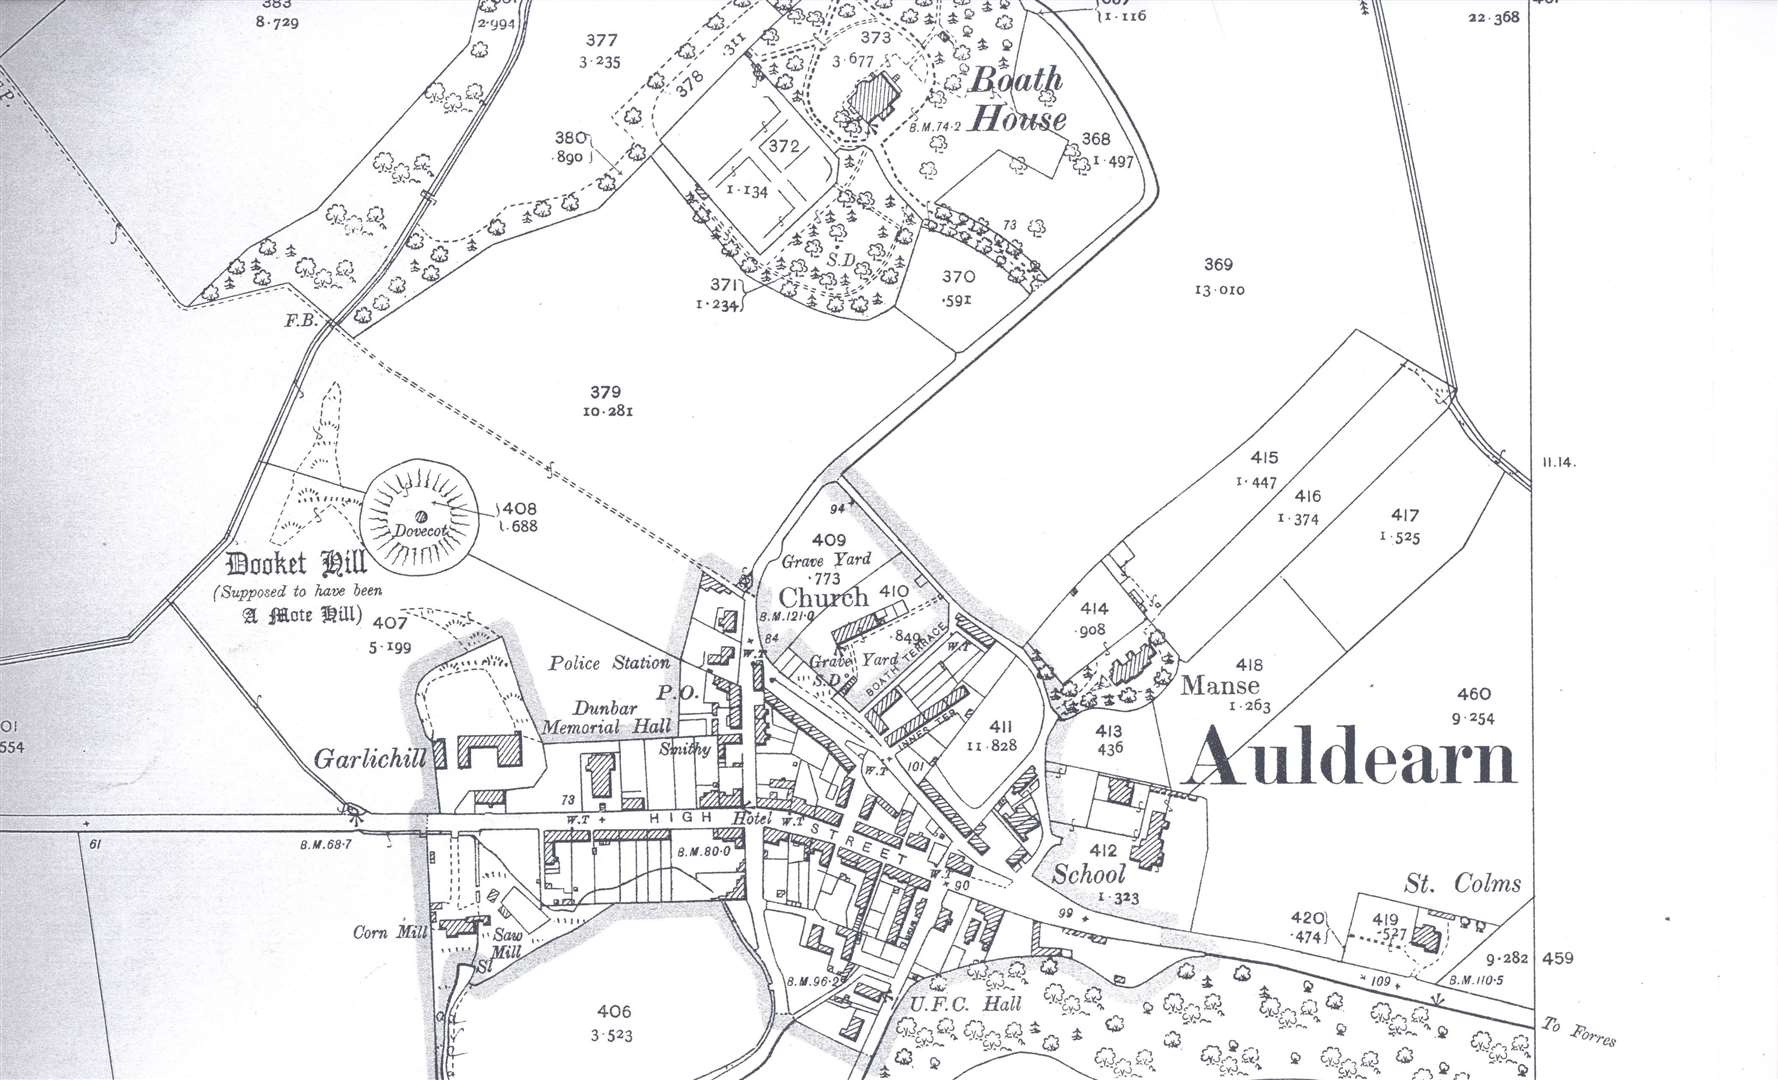 Extract from the Nairnshire Ordnance Survey map, sheet II.13, 1905.